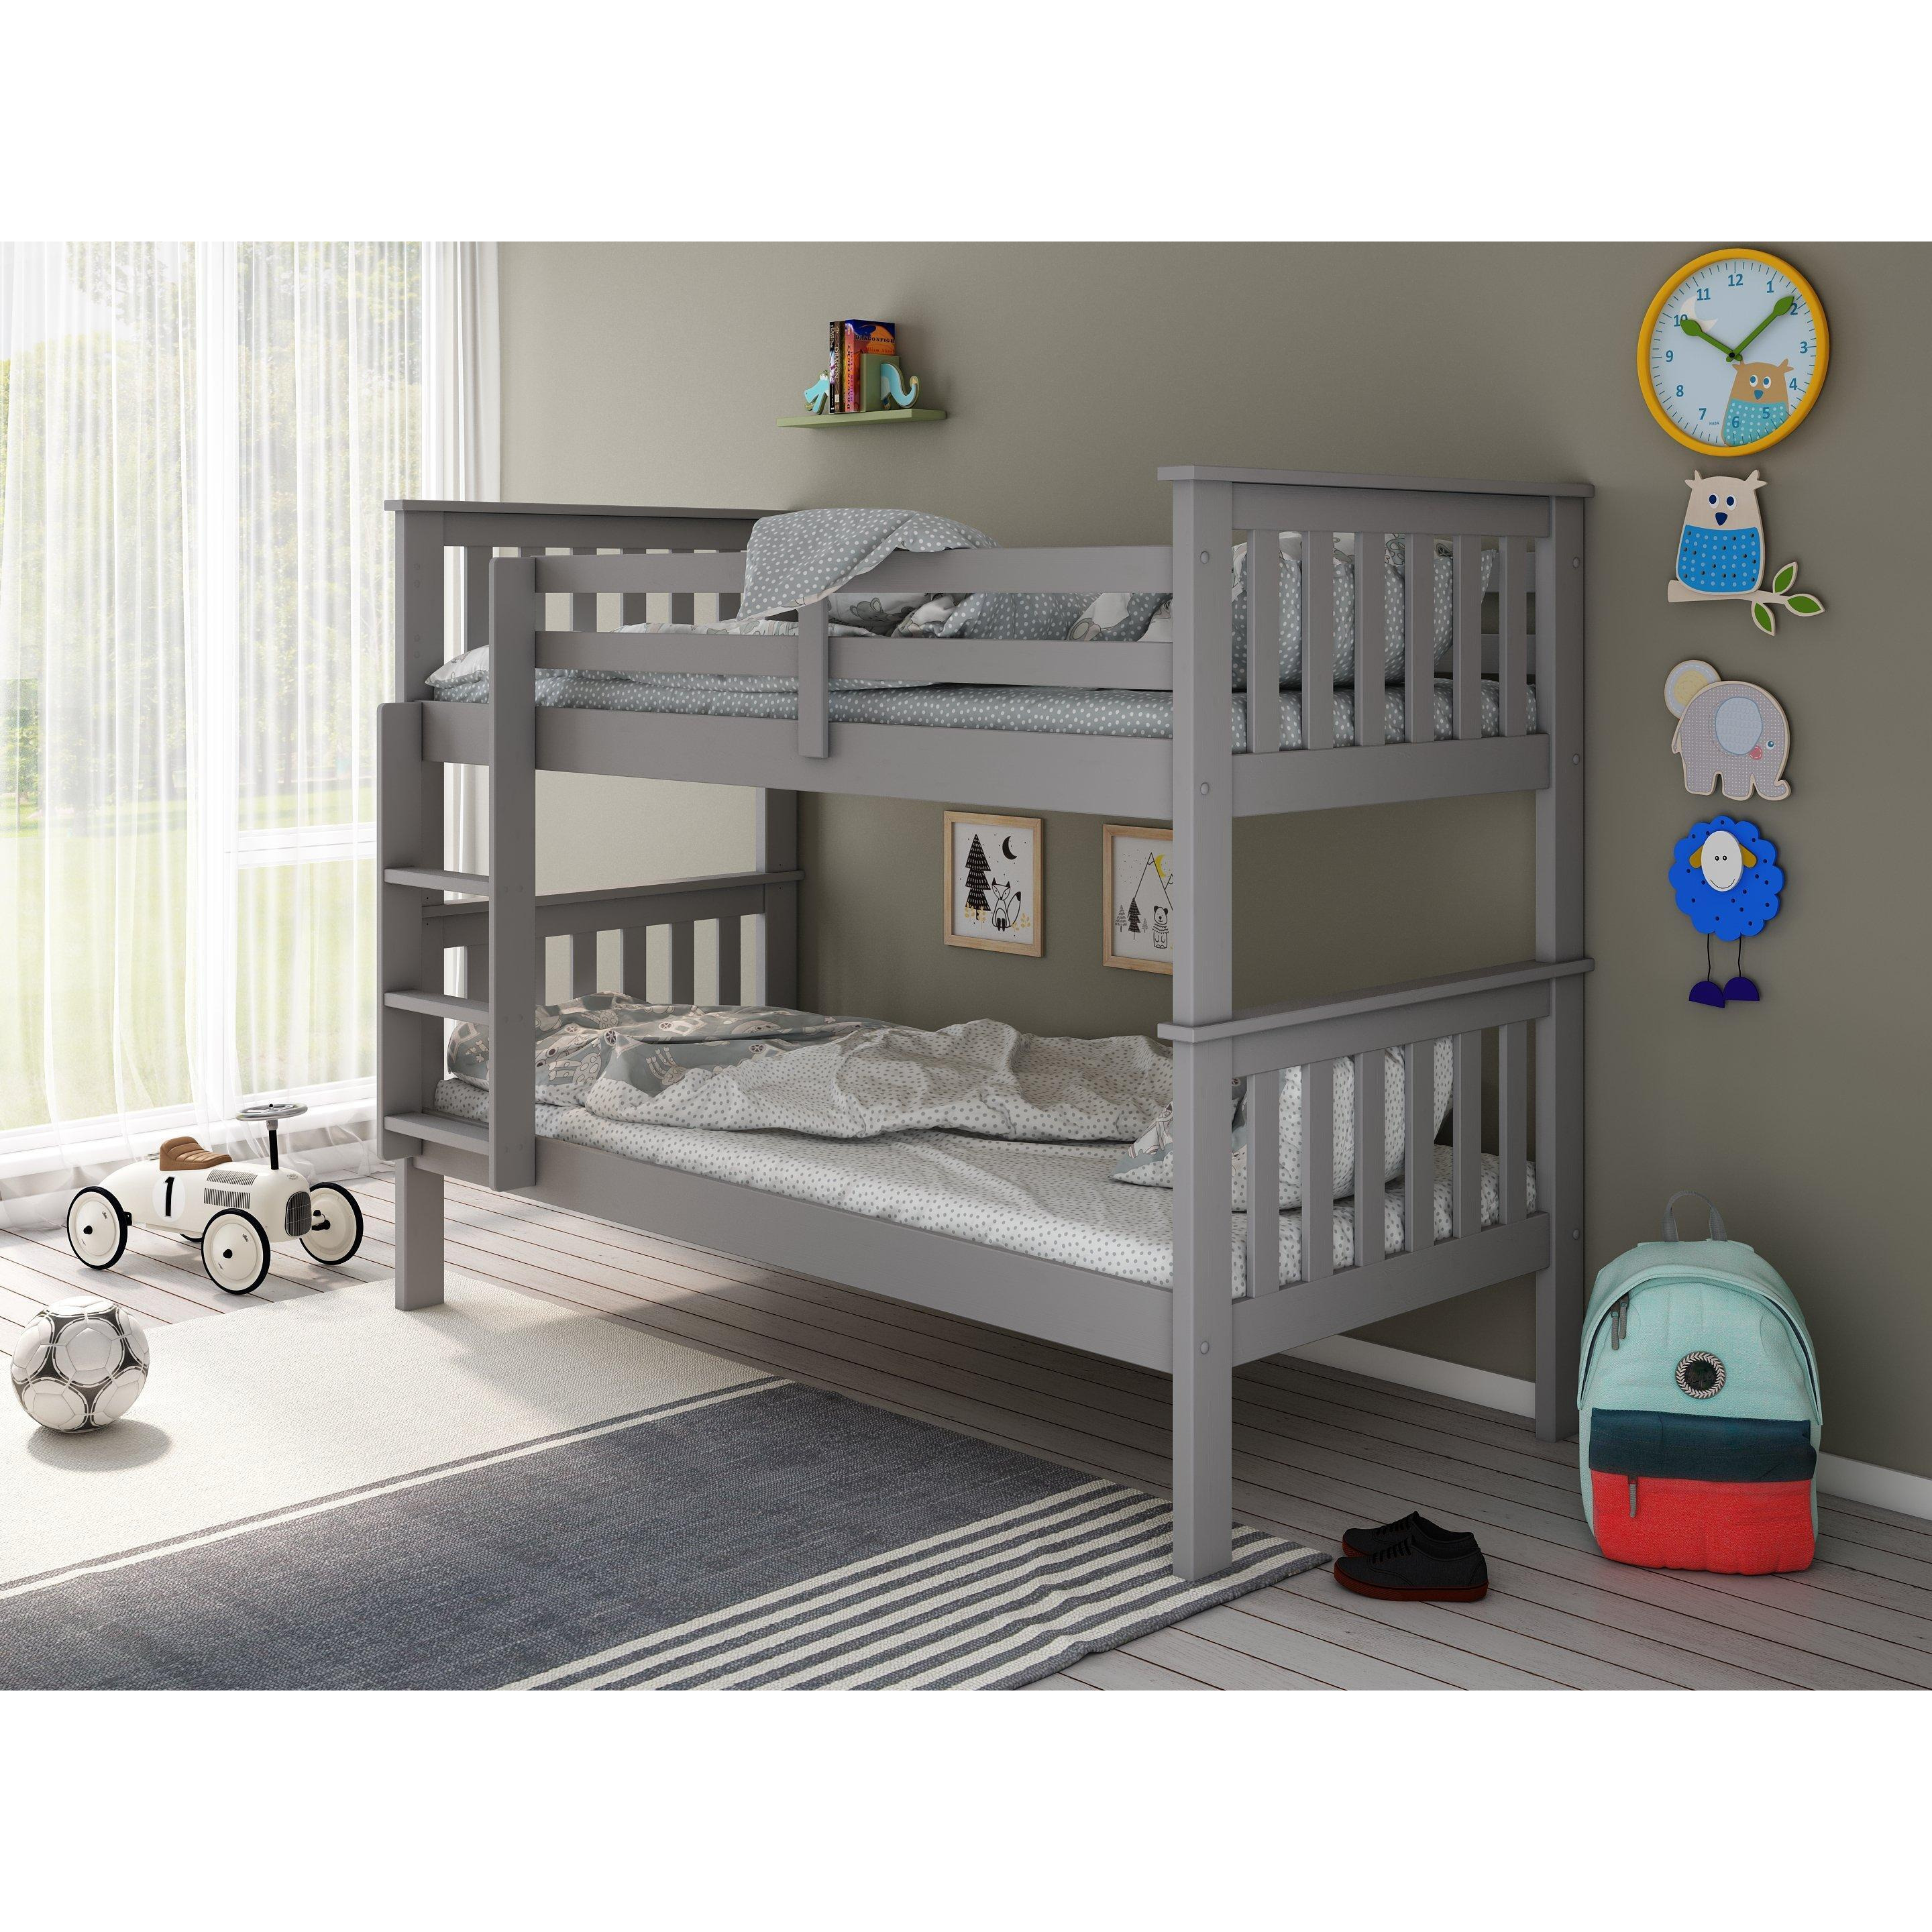 Carra Wooden Single Bunk Bed With Spring Mattresses - image 1